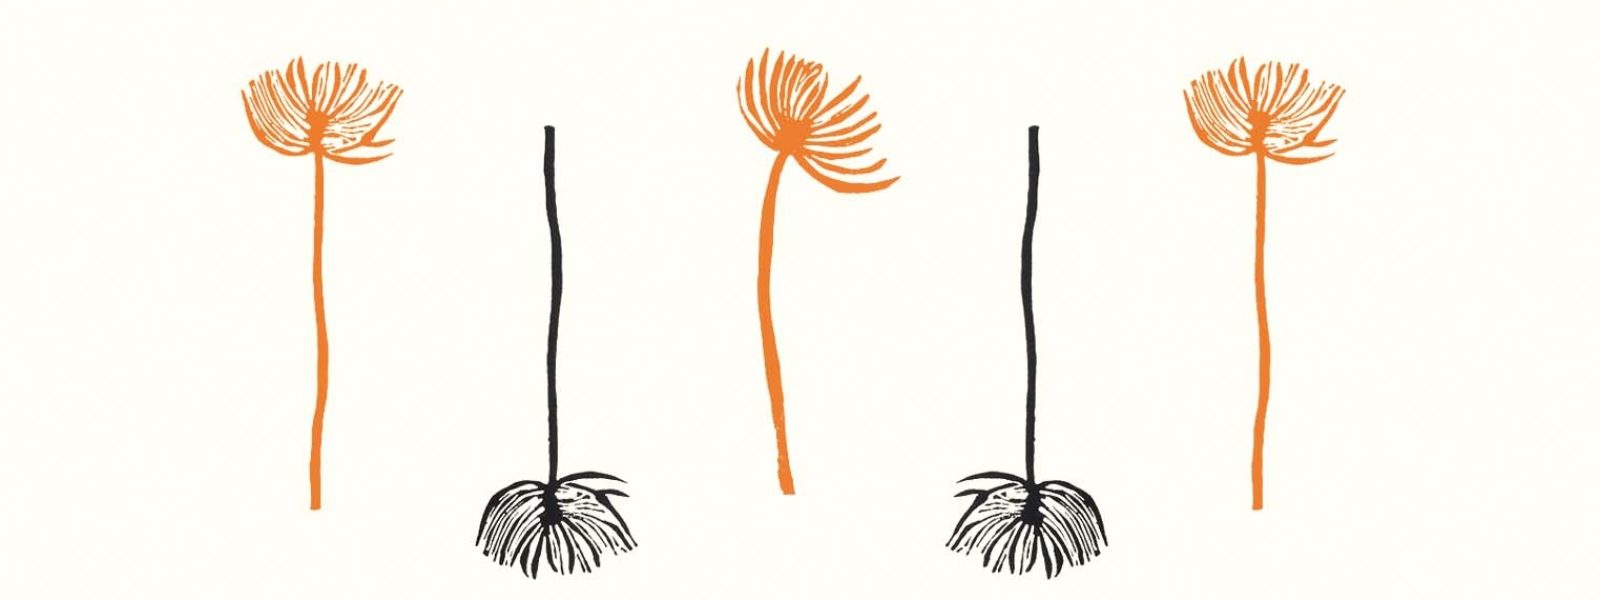 Book cover for julia Samuel's book "Grief Works" with four illustrated flowers on a white background.